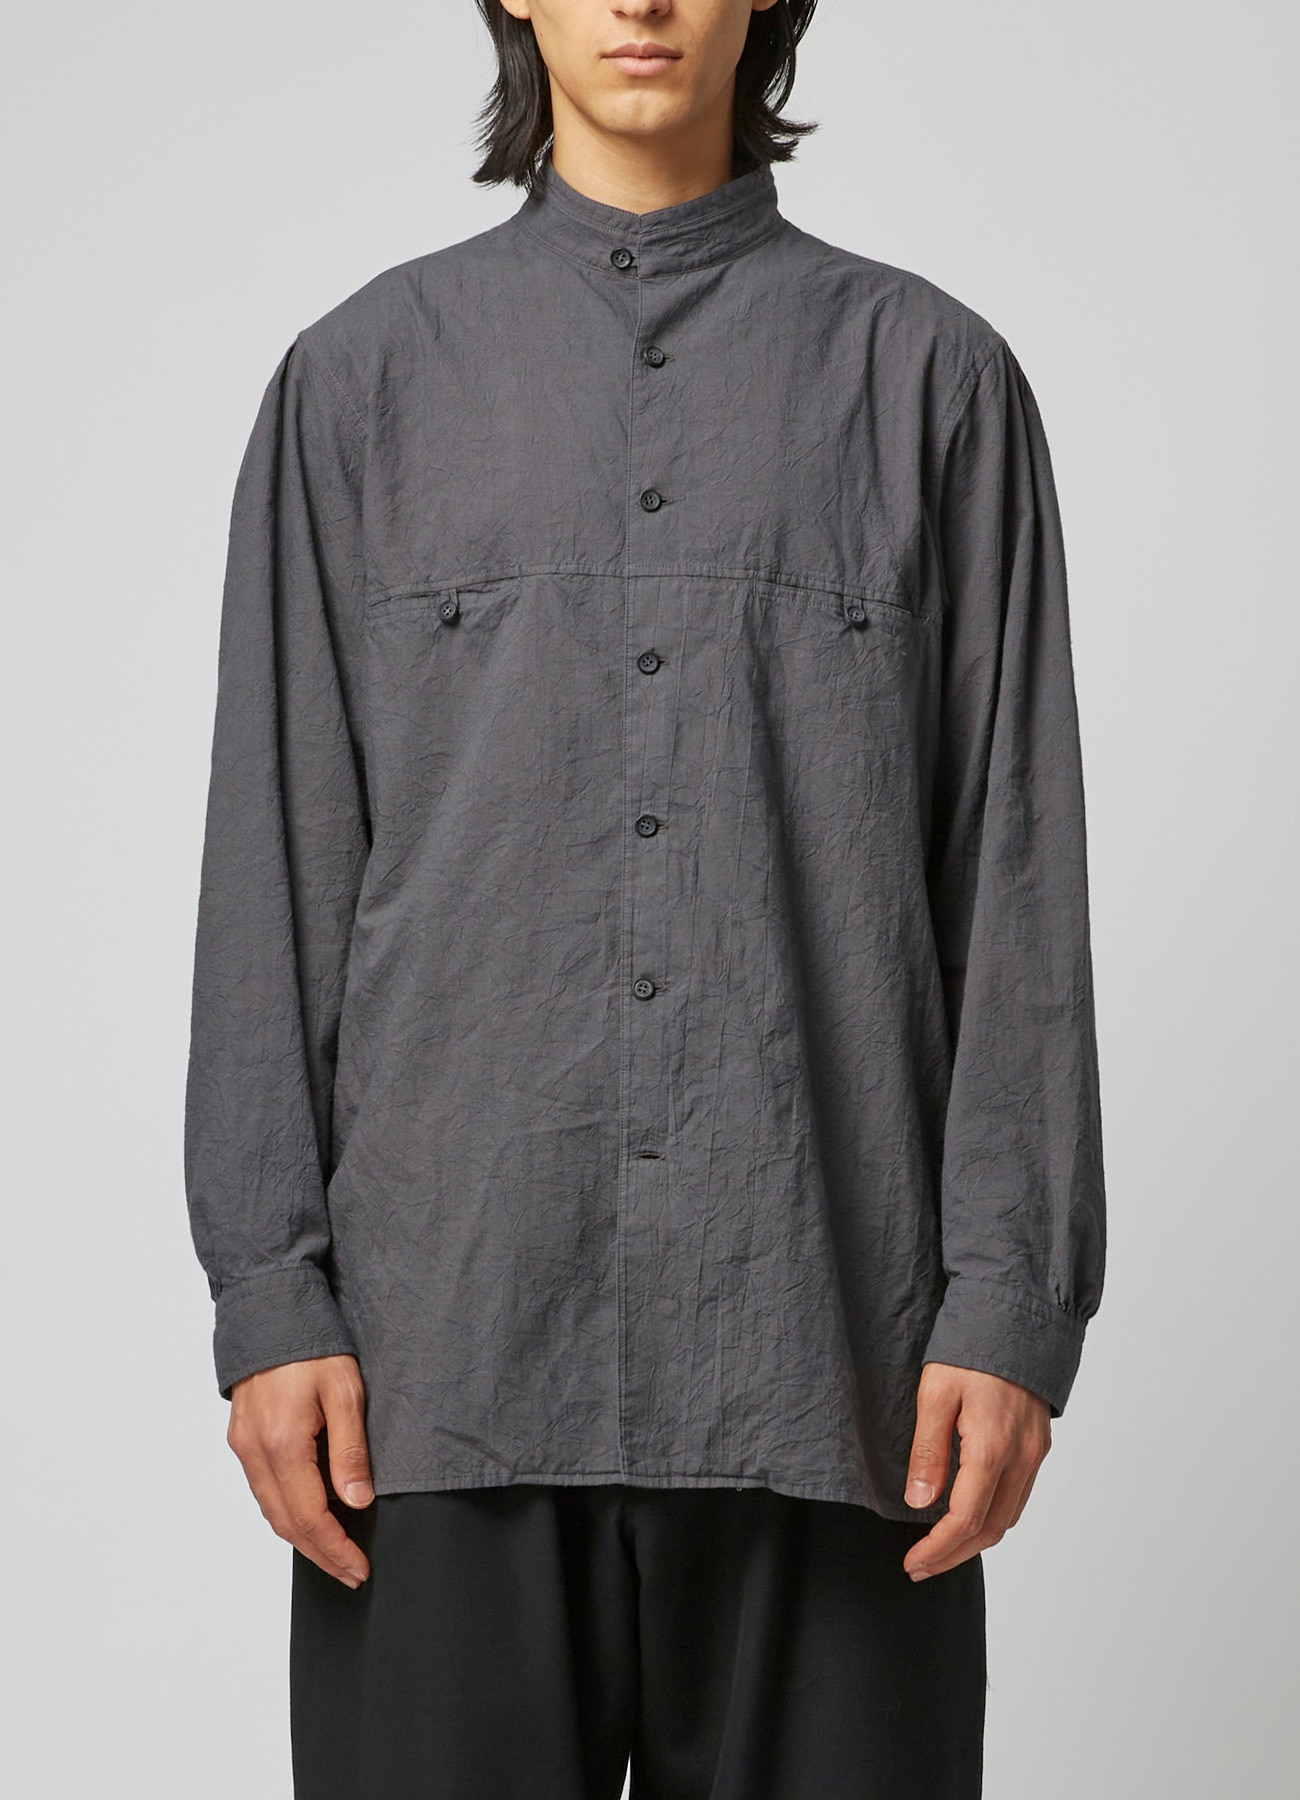 WRINKLED LAWN BLOUSE WITH YOKE POCKET AND STAND COLLAR